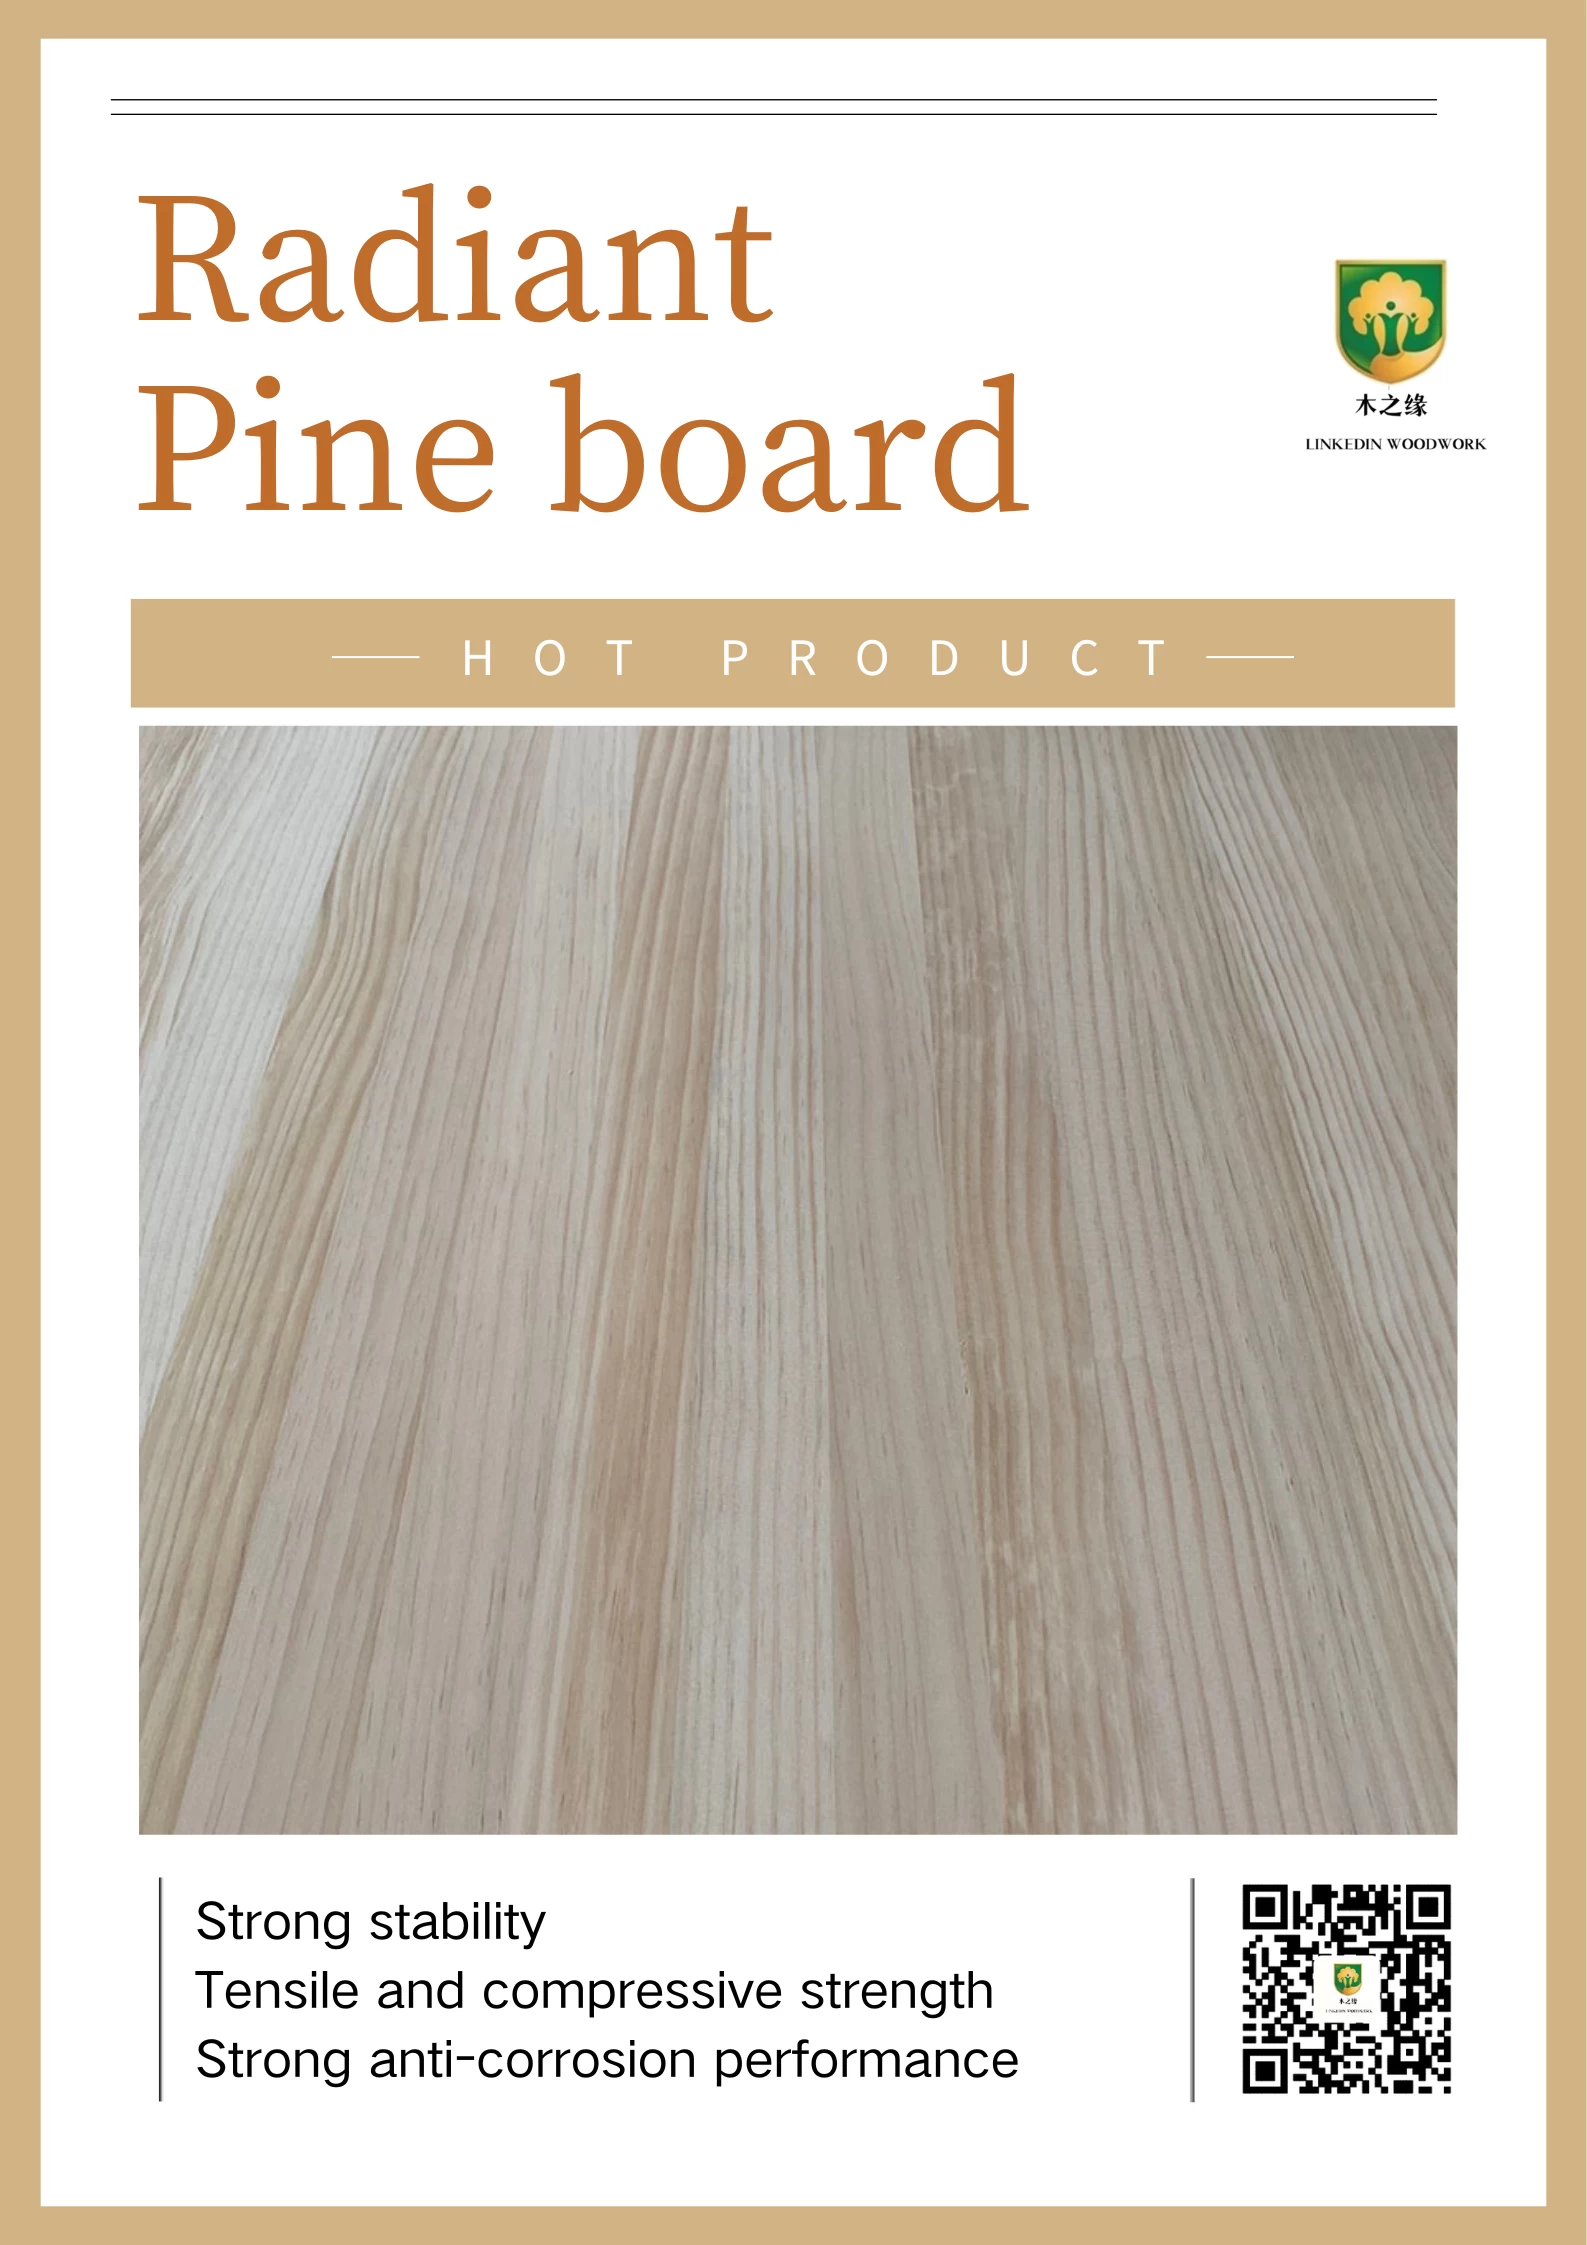 Hottest product – Radiata Pine Solid Wood Boards!